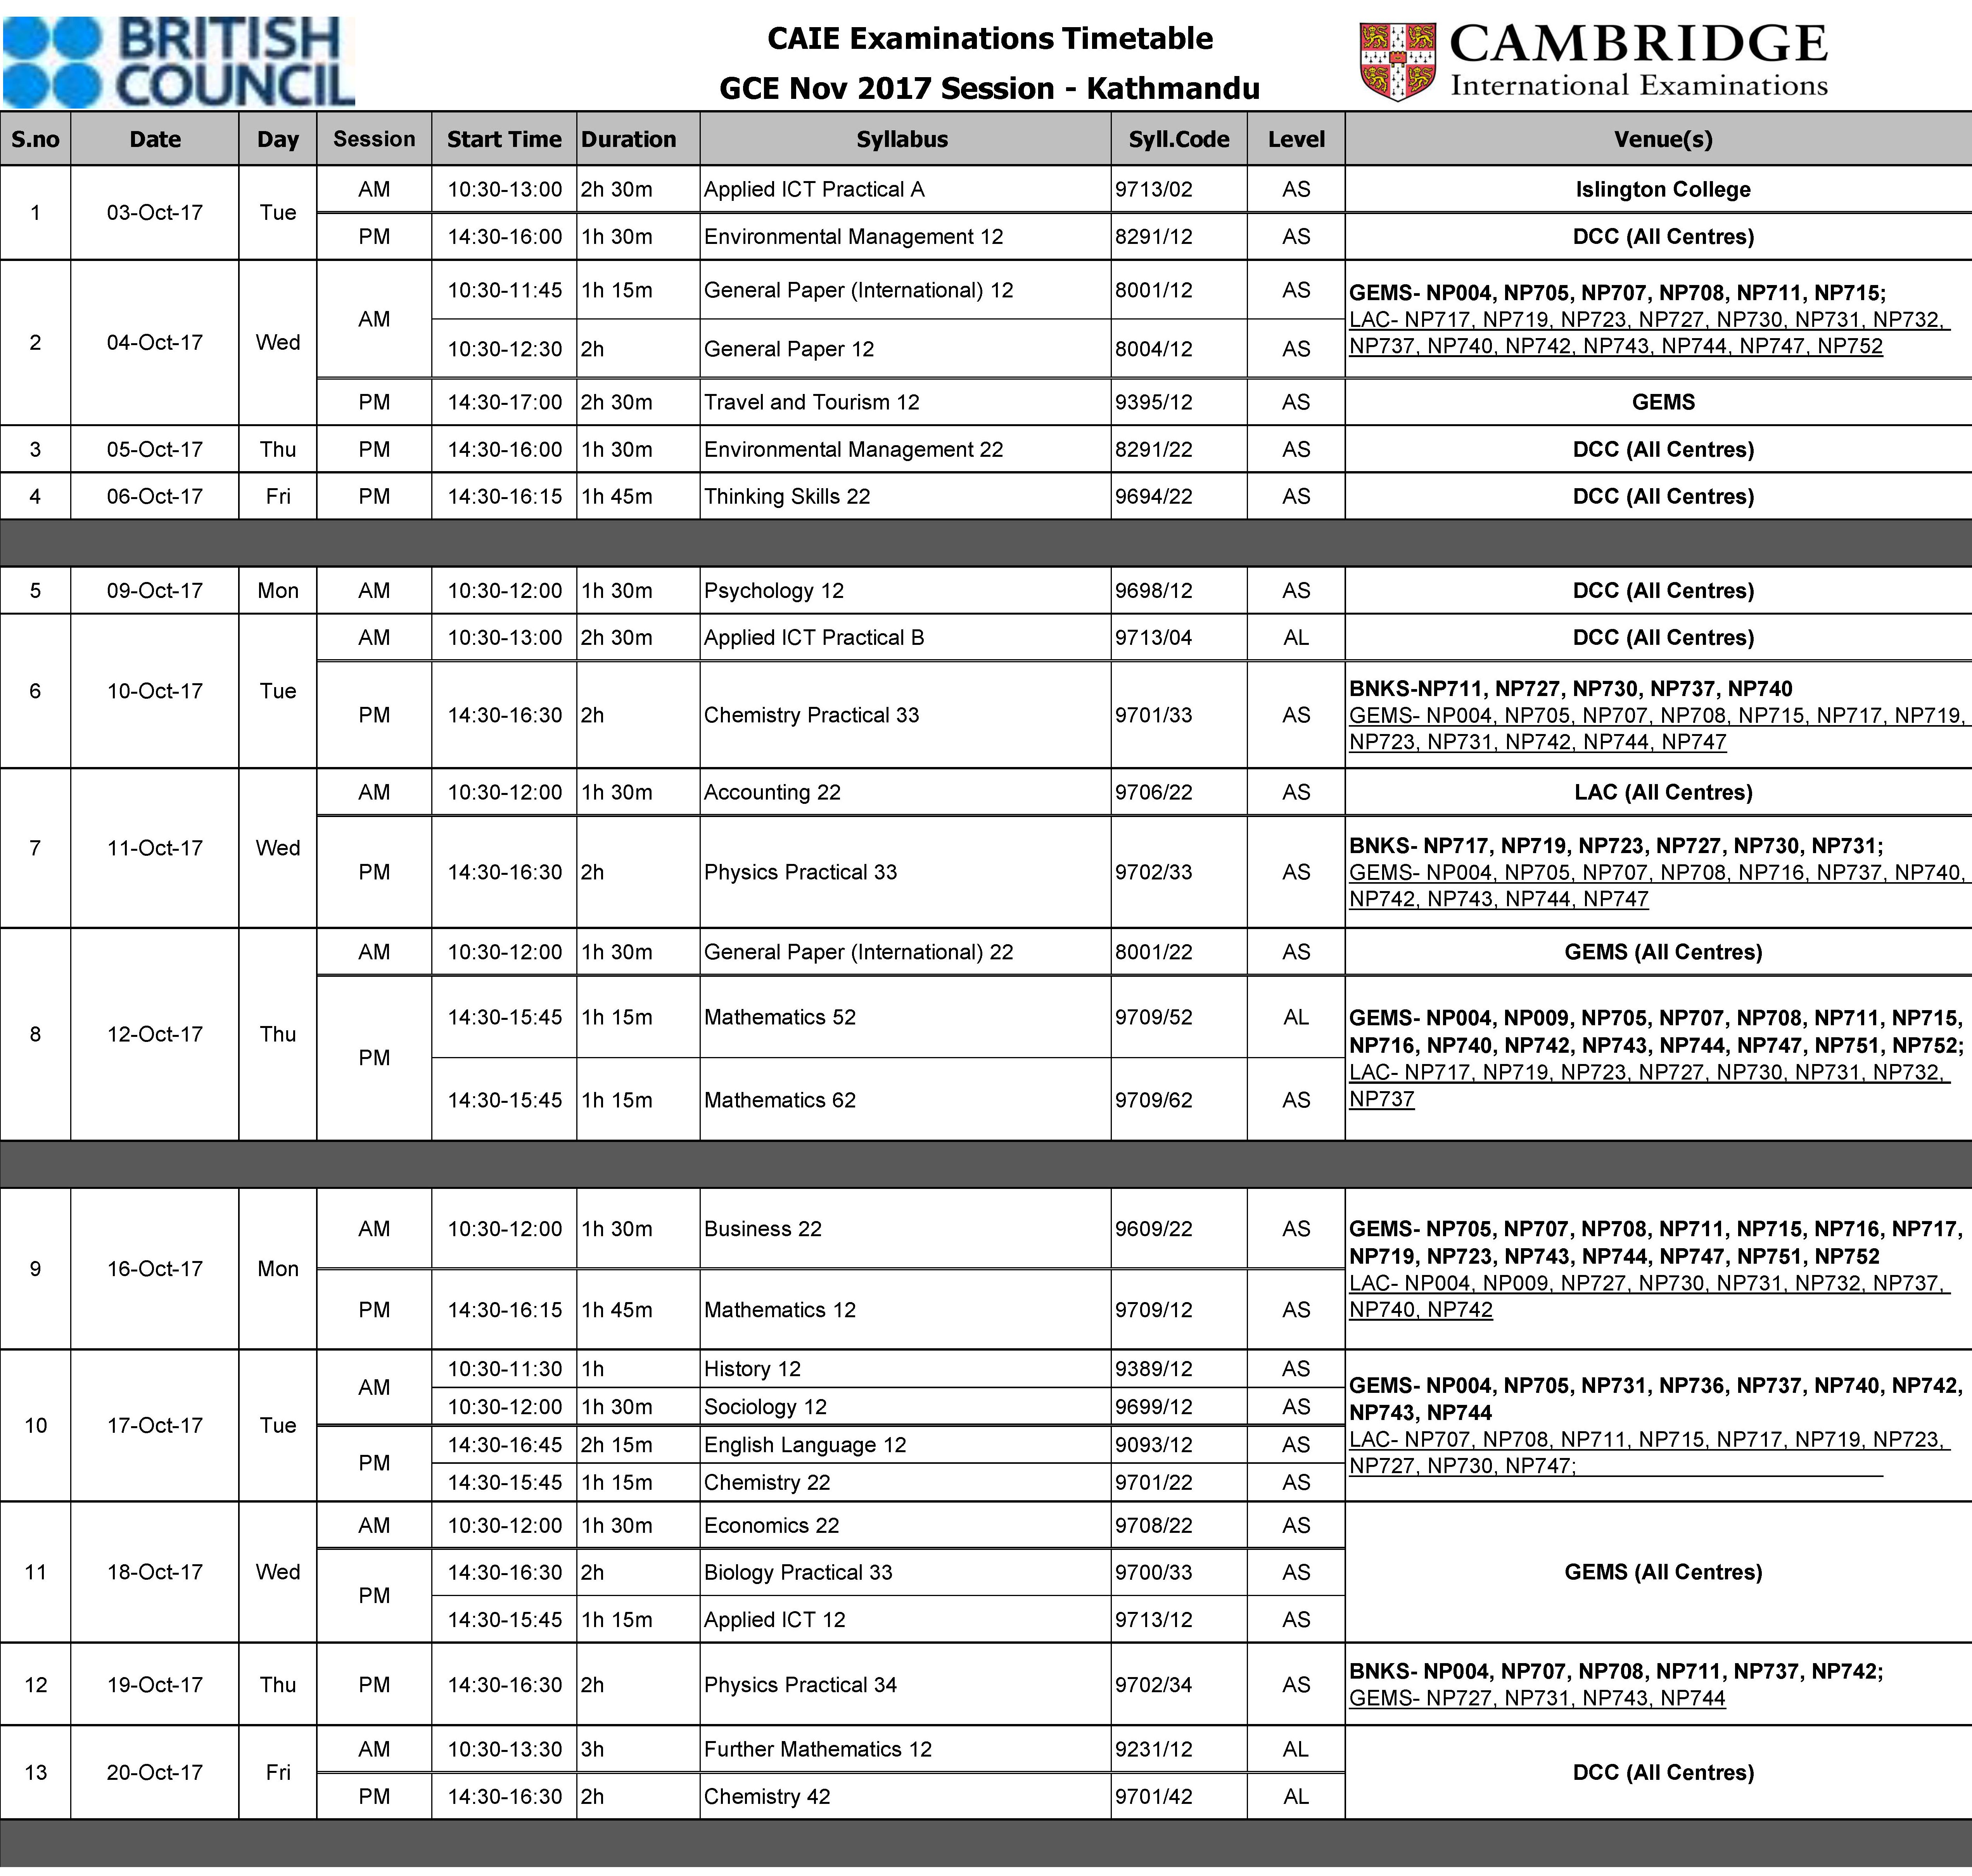 CIE Examinations Timetable from British Council